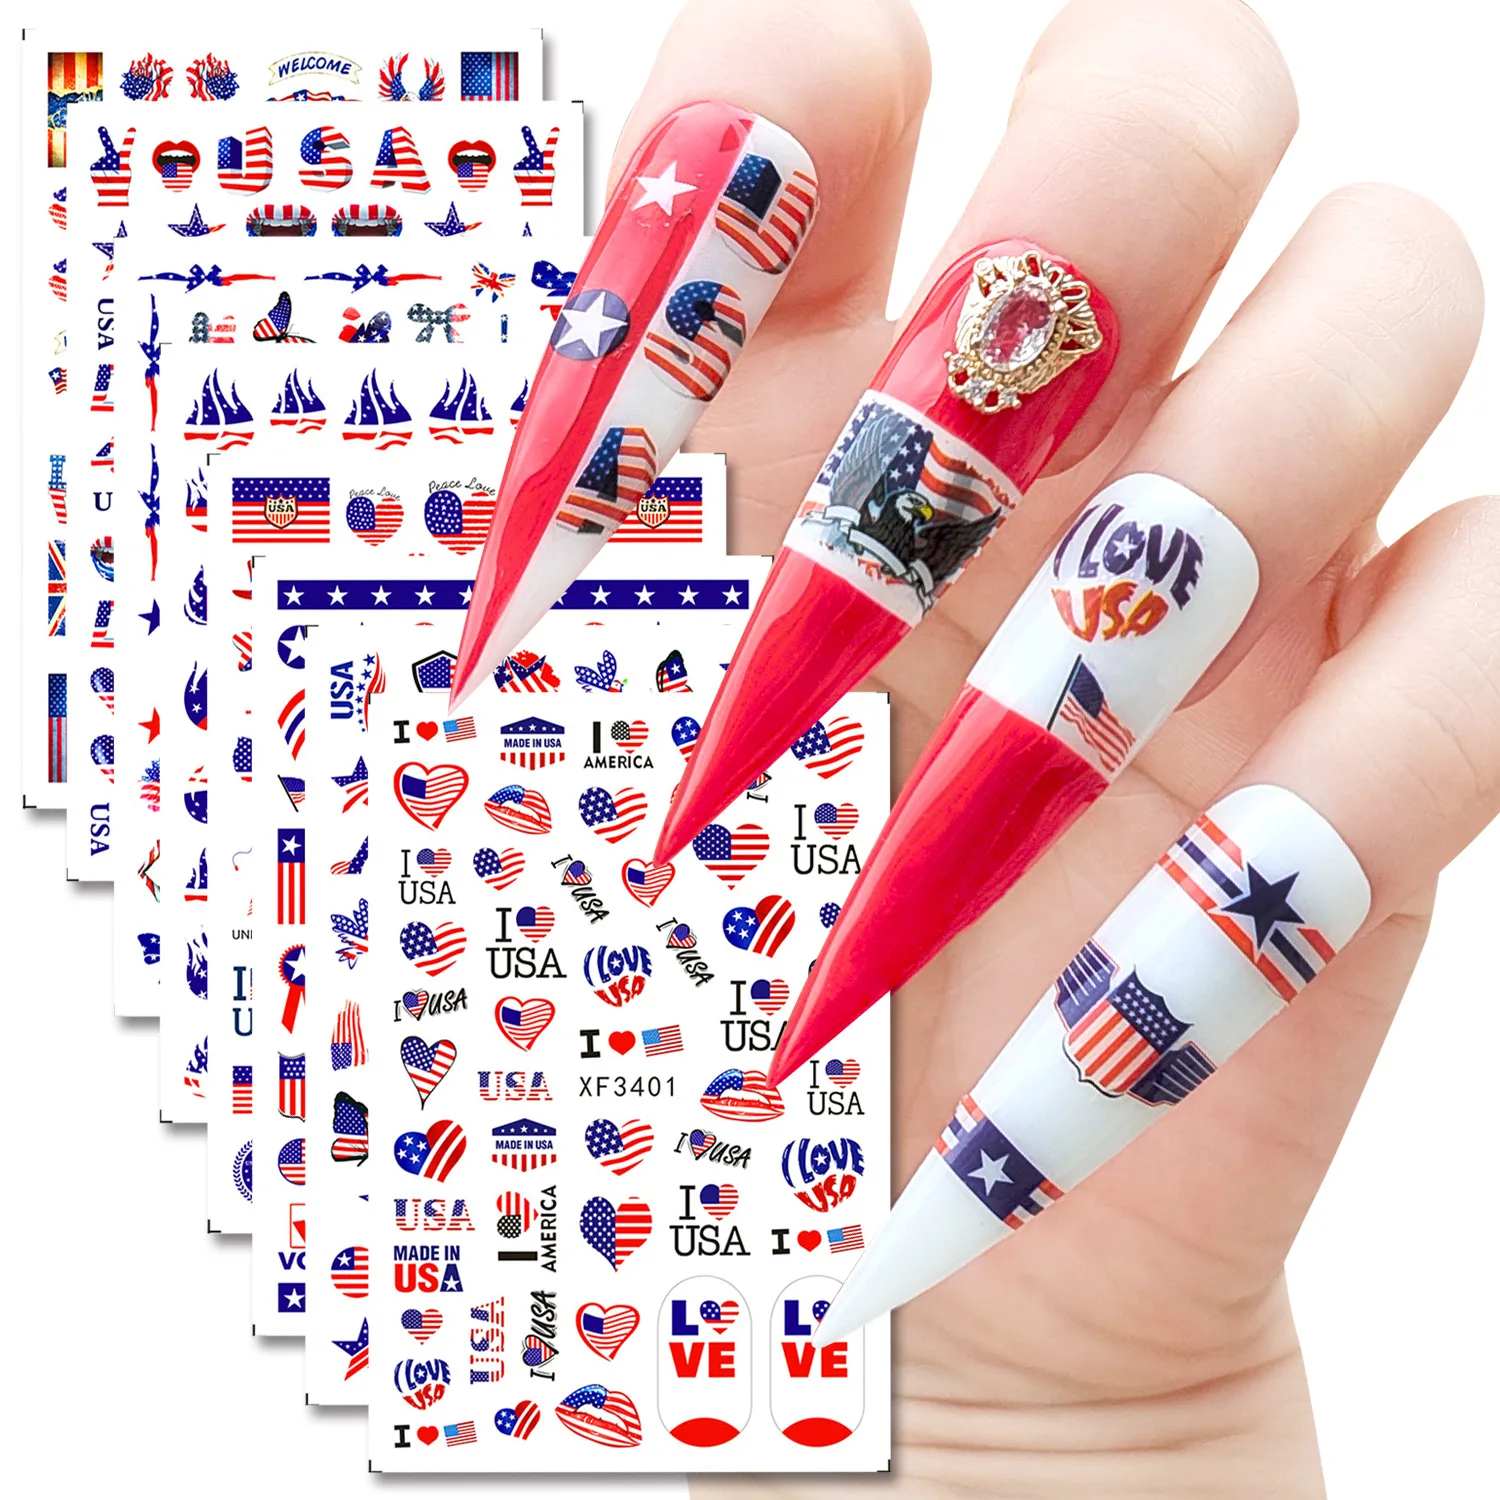 8 Sheets/lot Celebrate Independence Day USA America UK Flags Adhesive Nail Art Stickers Decals Manicure Ornaments Set